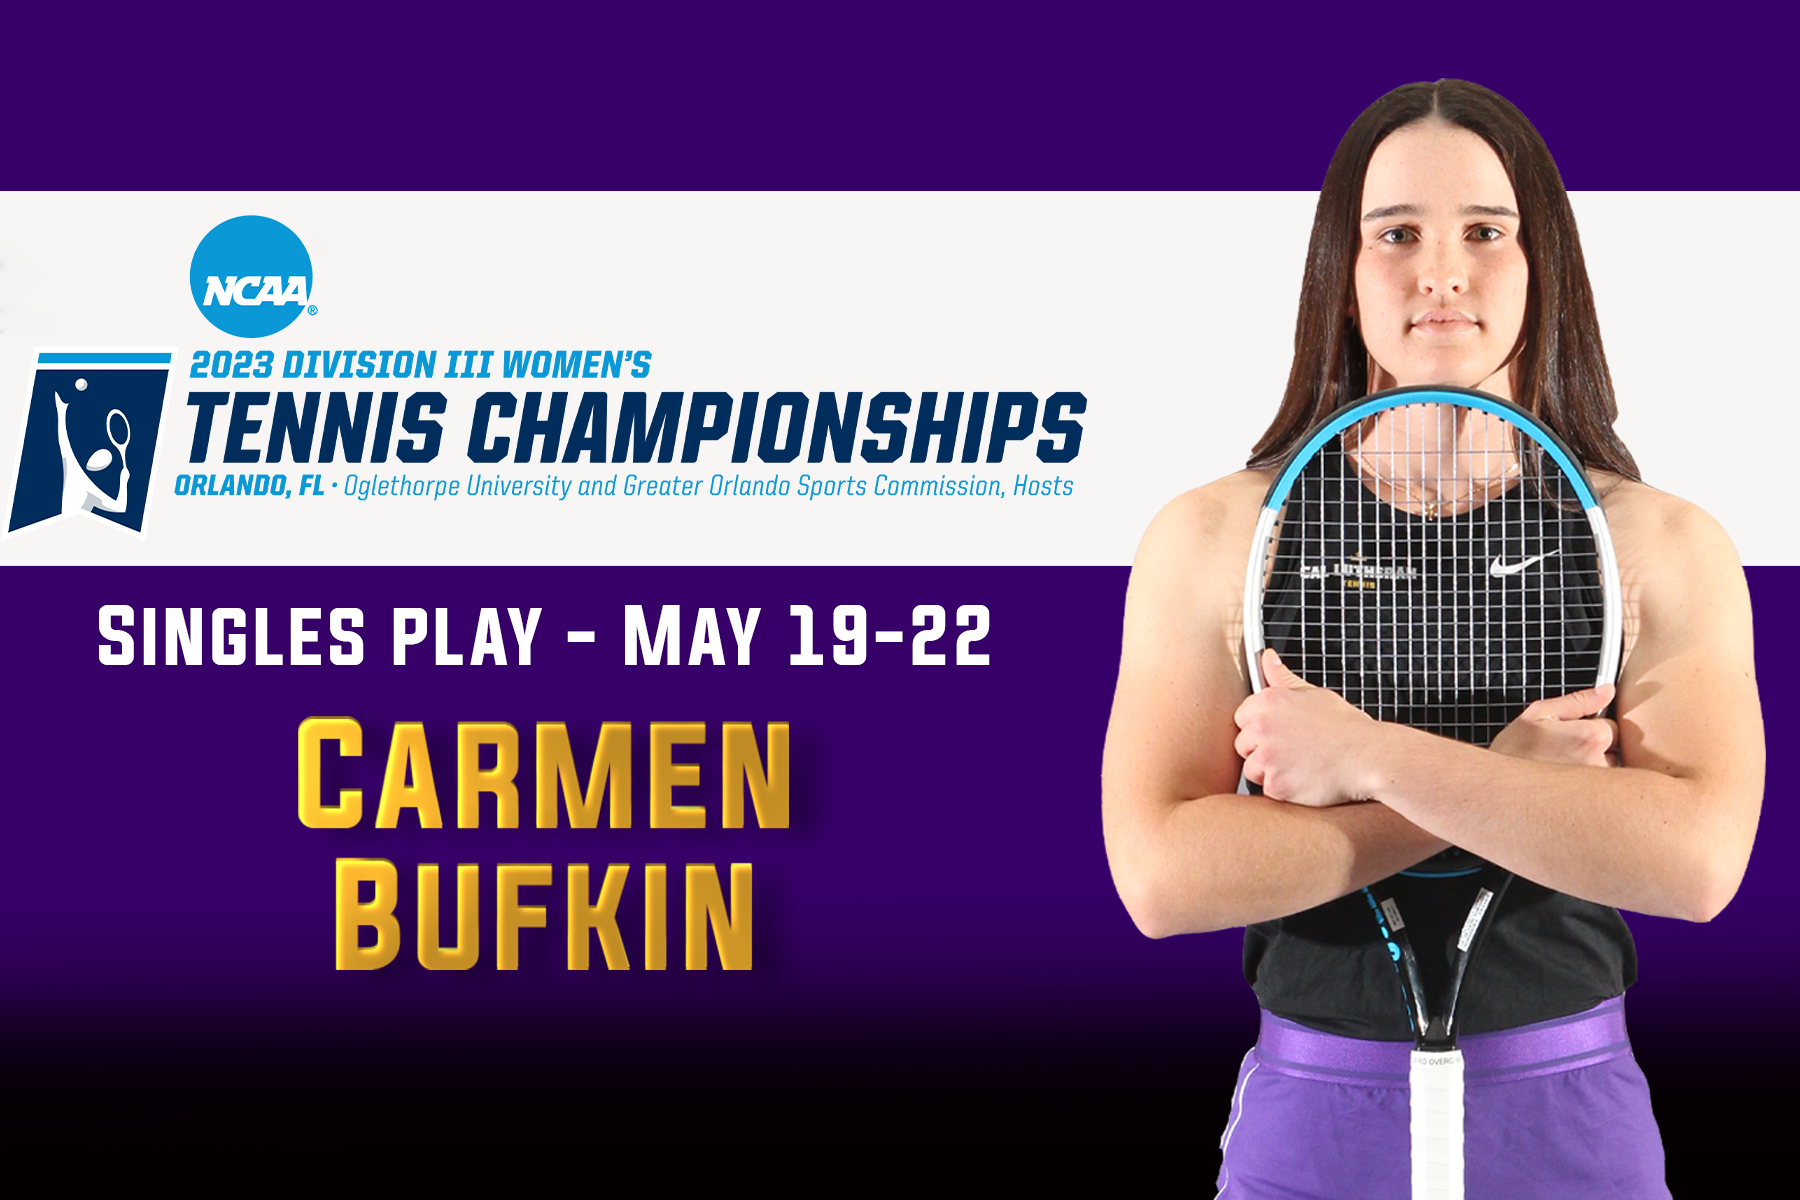 Bufkin Selected for Singles Competition at NCAA Division III Women’s Tennis Championships